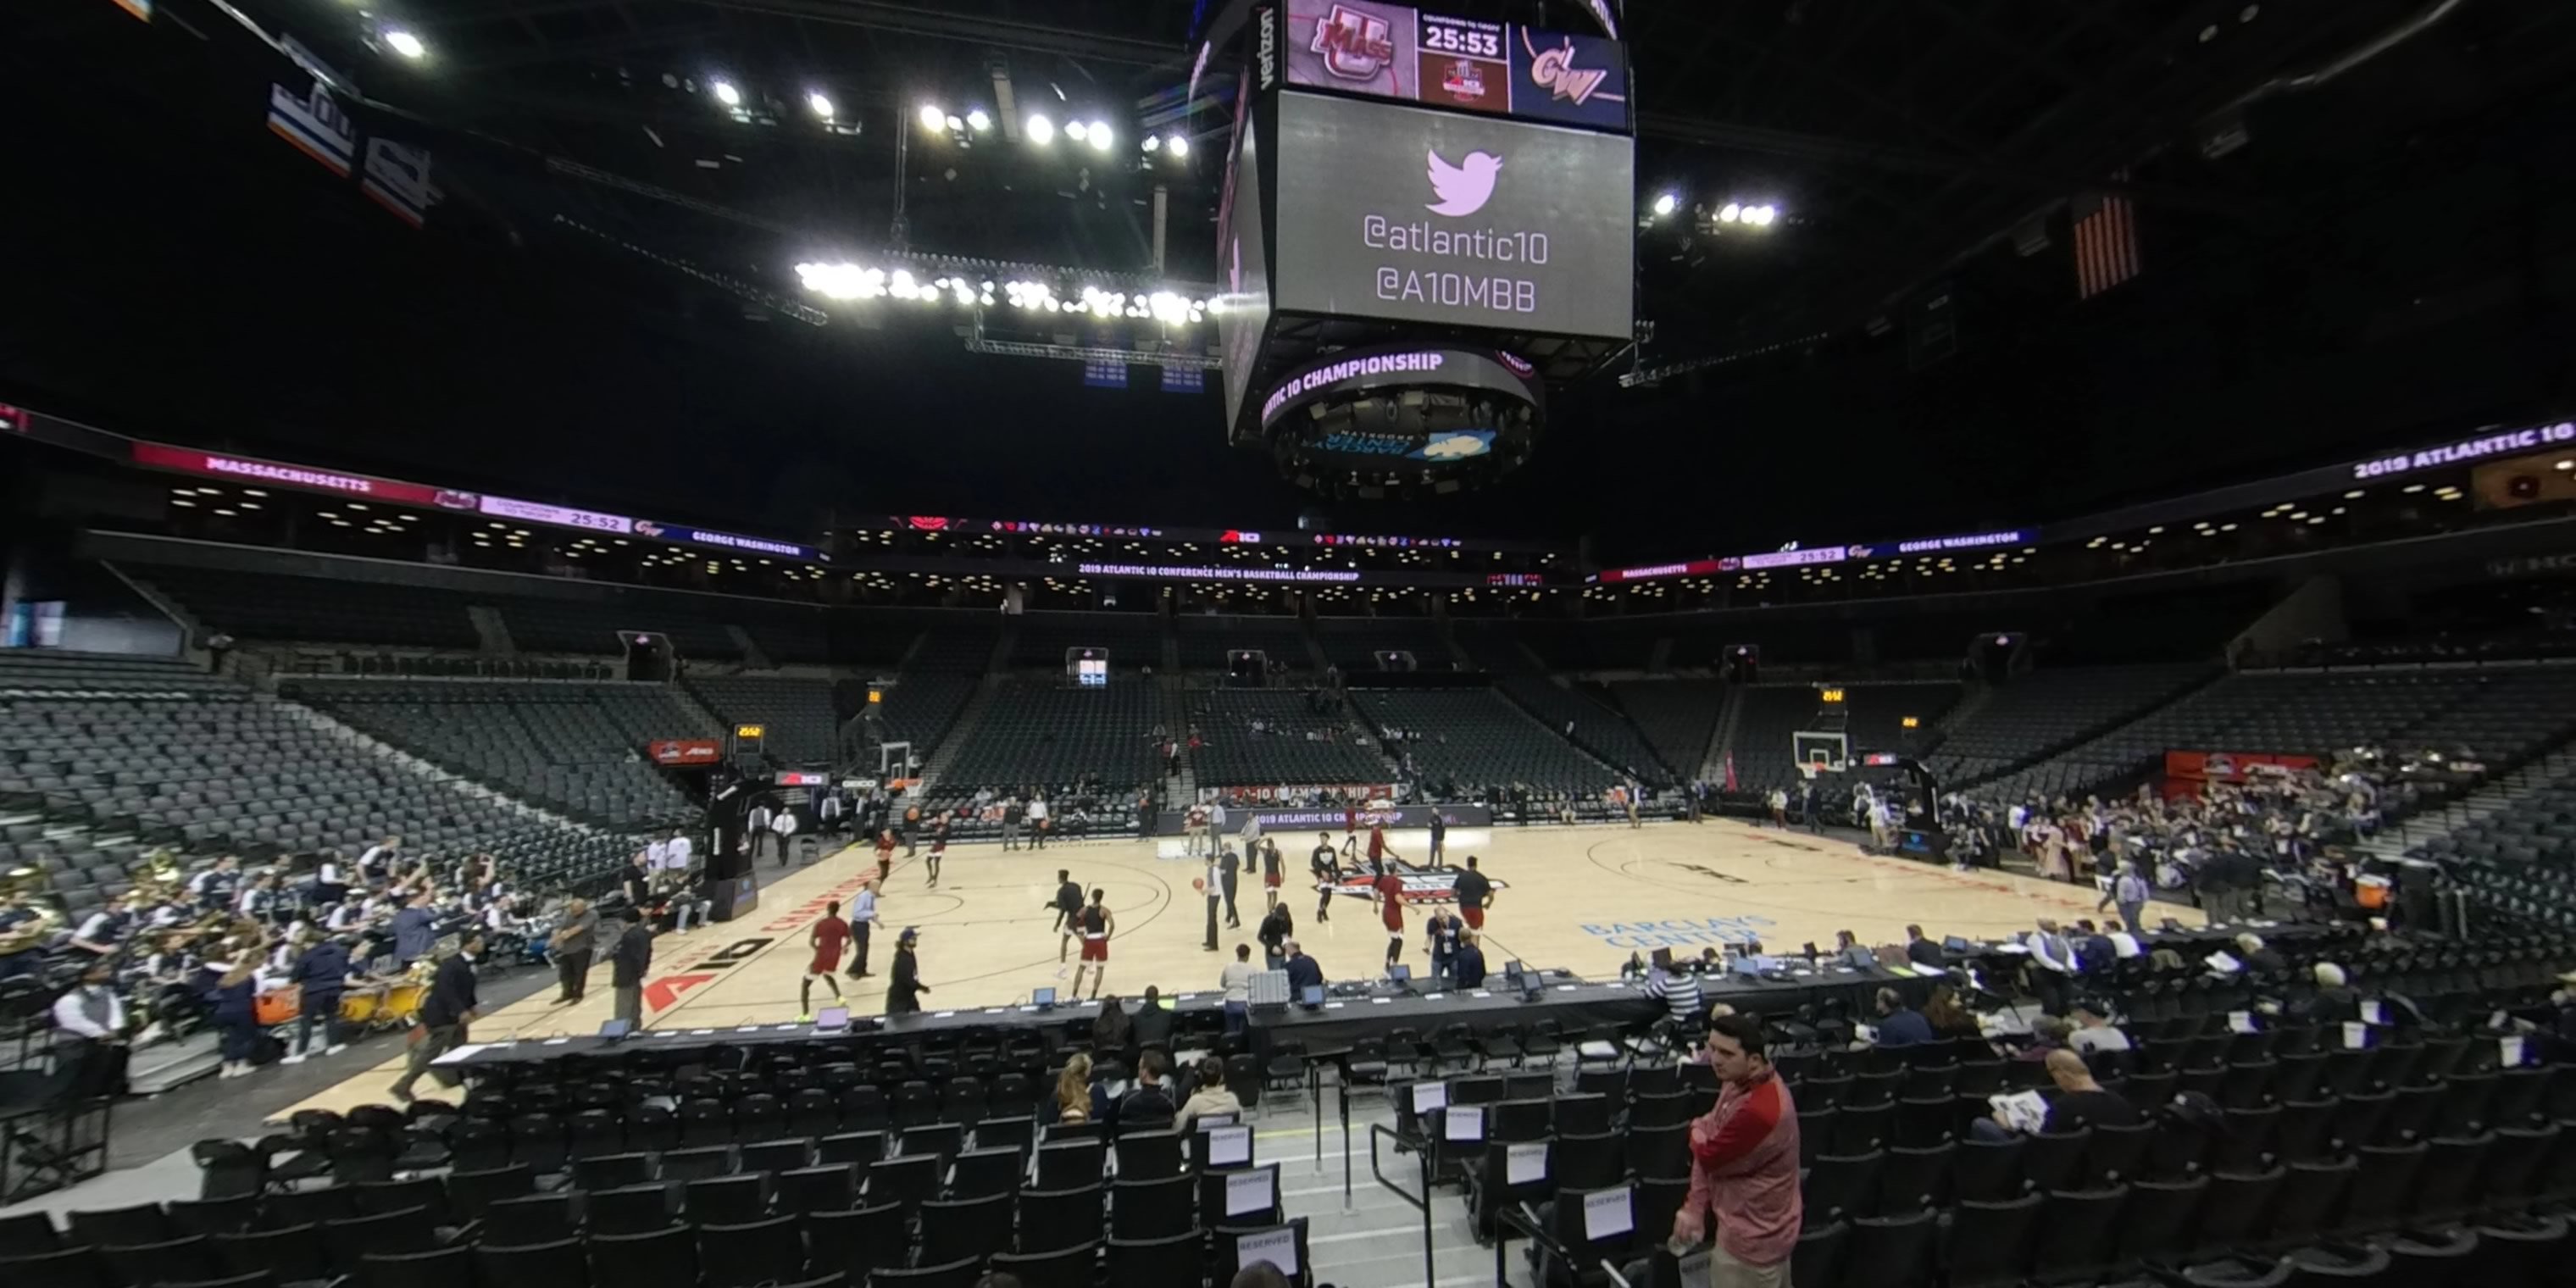 section 24 panoramic seat view  for basketball - barclays center